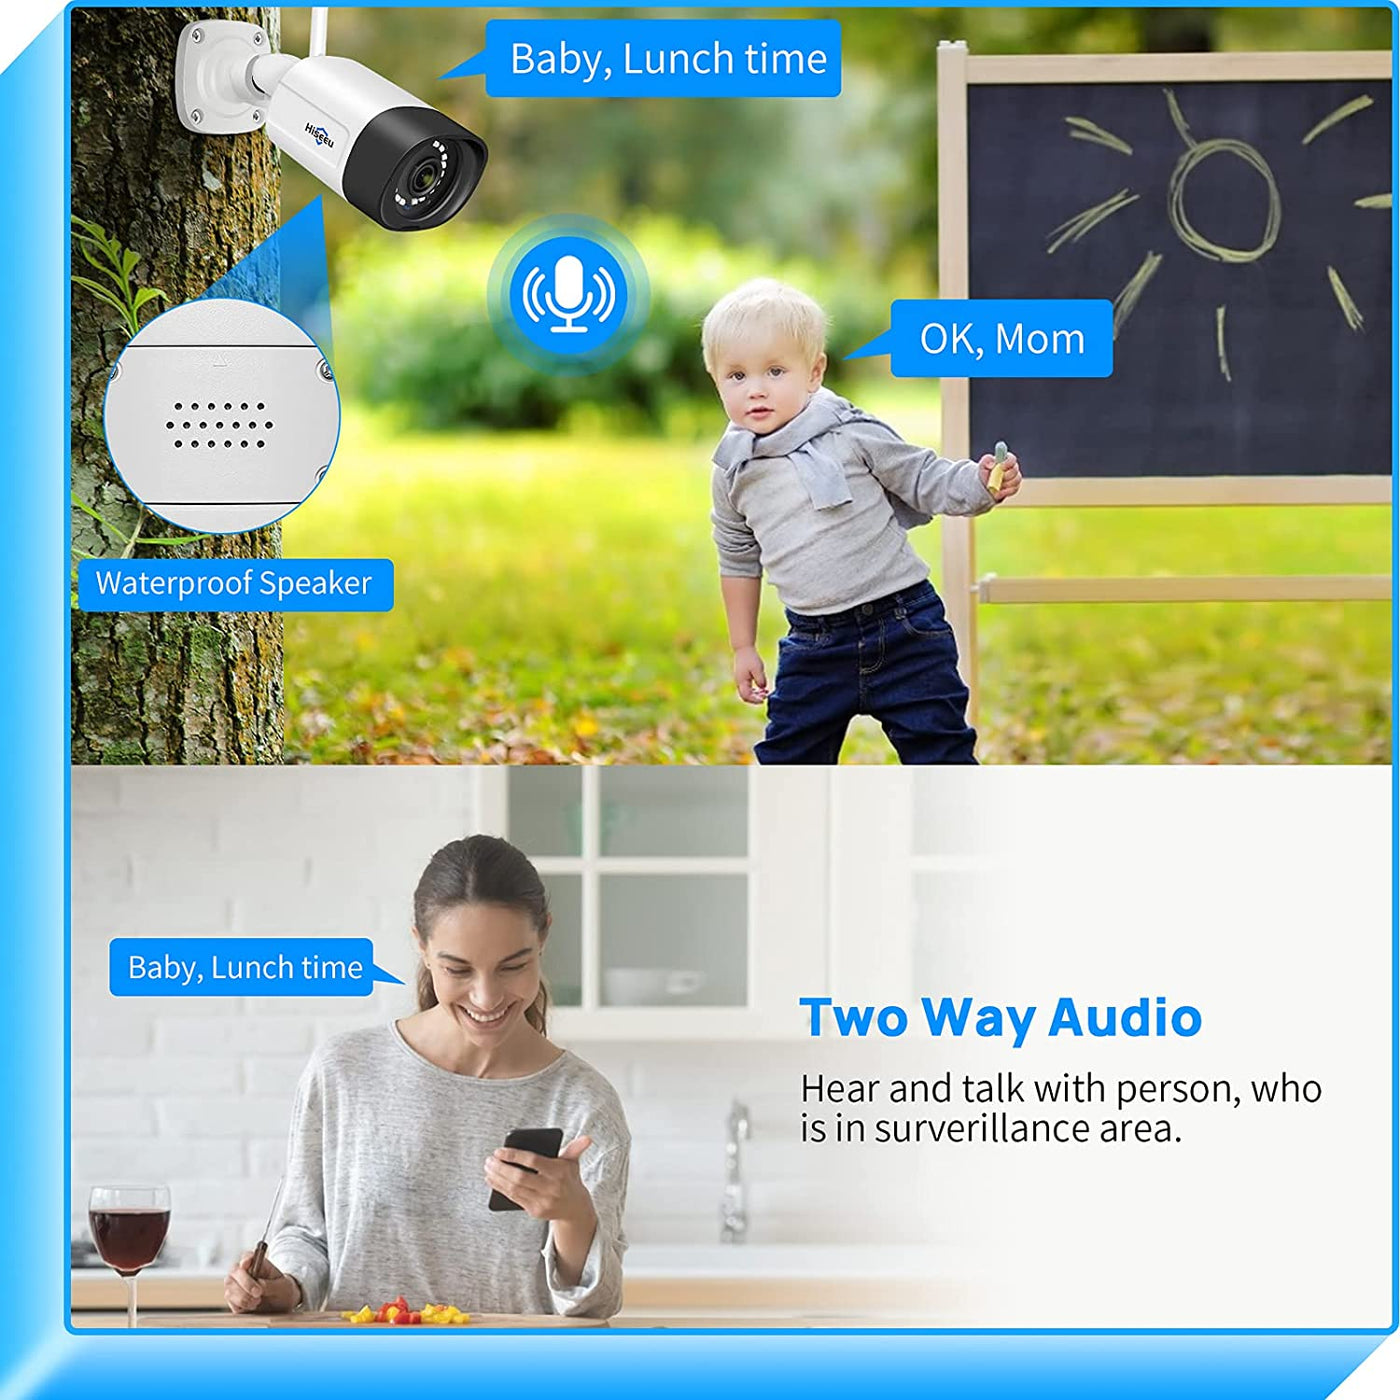 【Dual Wi-Fi,2-Way Audio】2K WiFi Security Camera System,3 Megapixels,Expandable 8CH NVR,1TB Hard Drive,12V DC Power Cords,Mobile&PC Remote,IP66 Waterproof,Motion Alert,Plug&Play,24/7 Motion Recording(Refurbished)